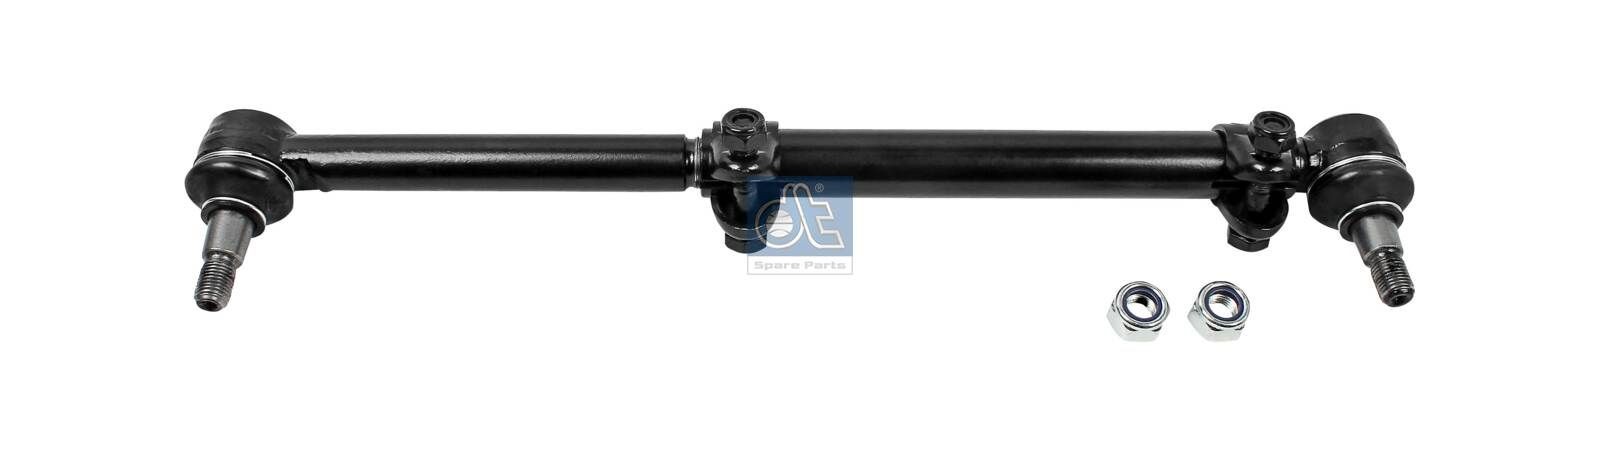 DT Spare Parts 4.67414 Rod Assembly A 601 460 13 05